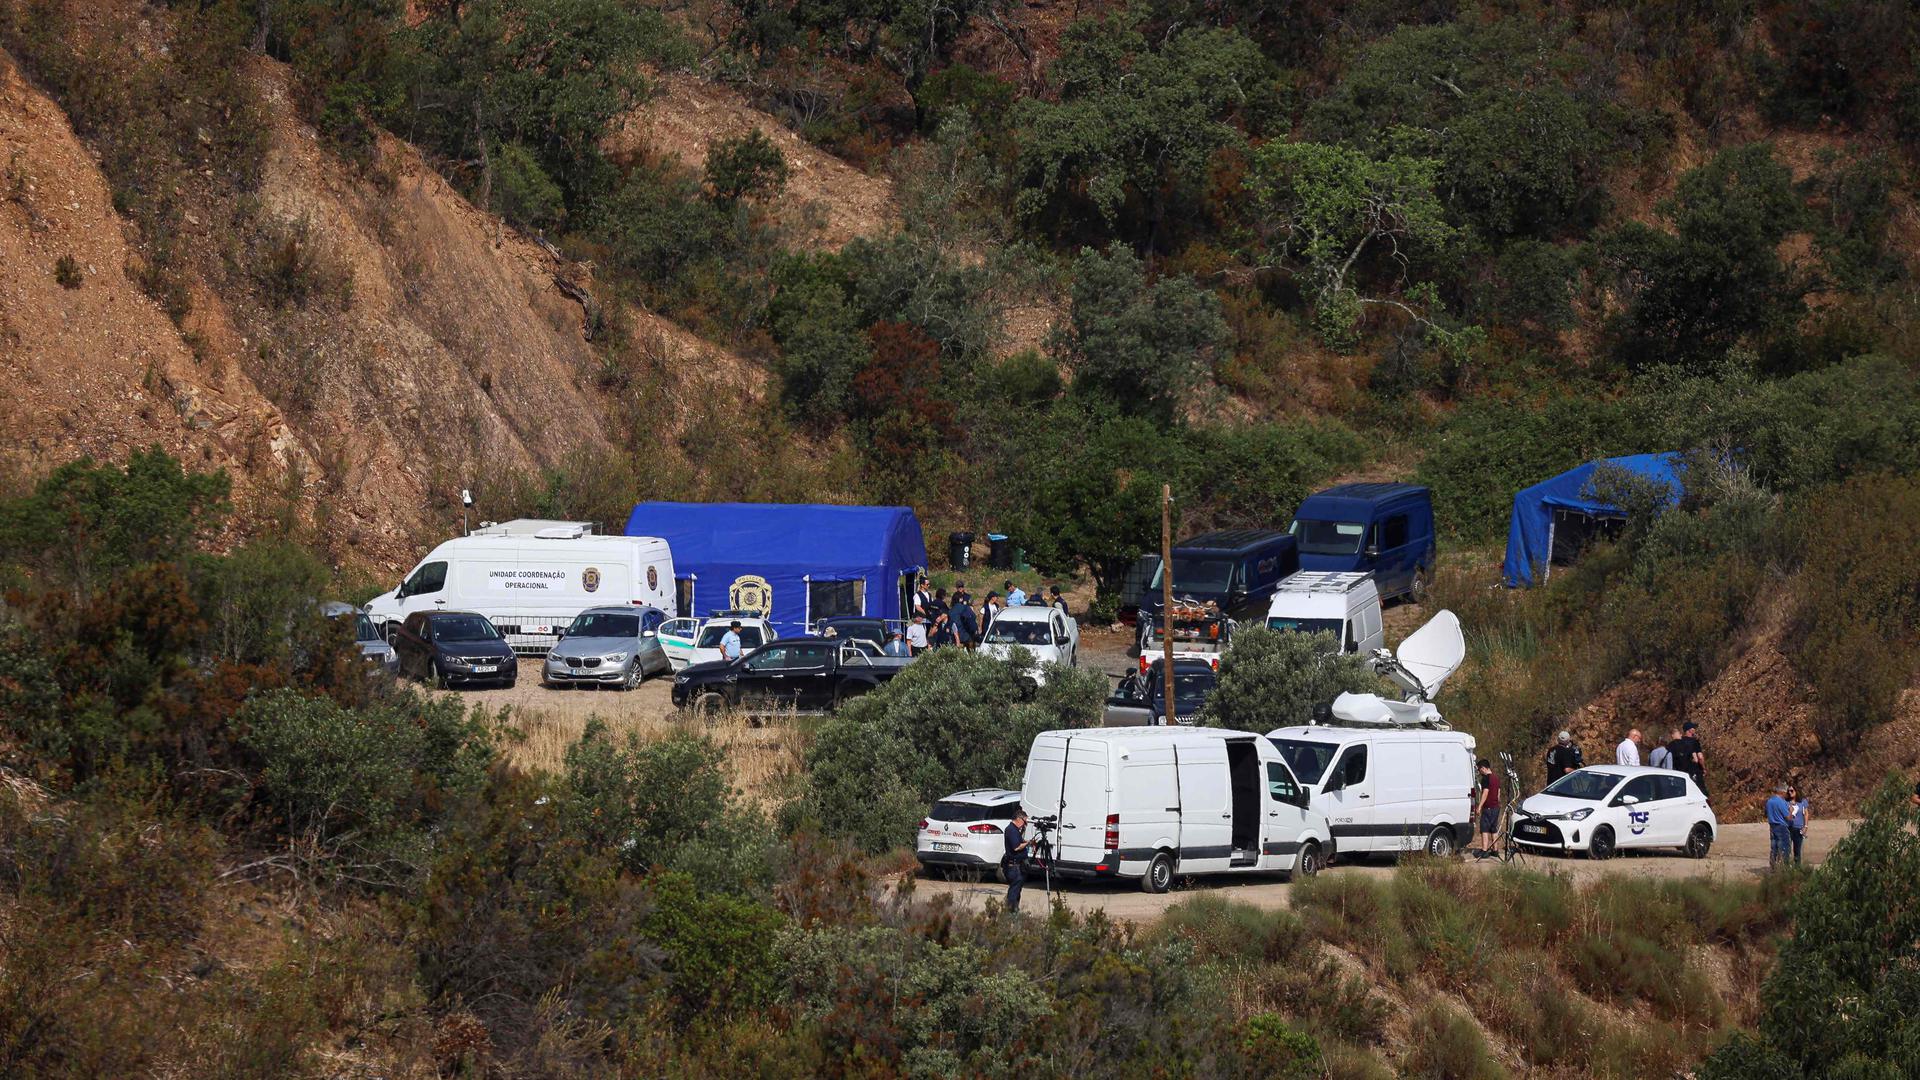 Portuguese authorities from the Judicial Police (PJ) criminal investigation unit work during a new search operation amid the investigation into the disappearance of Madeleine McCann (Maddie) at the Arade dam, in Silves, near Praia da Luz, on 23 May, 2023. This operation stems from a European Investigation Order addressed by the German authorities to Portugal and focuses on the Arade dam, located about 50 kilometers from Praia da Luz, the place where the child disappeared in May 2007, 16 years ago, while on vacation with her parents. (Photo by FILIPE AMORIM / AFP)